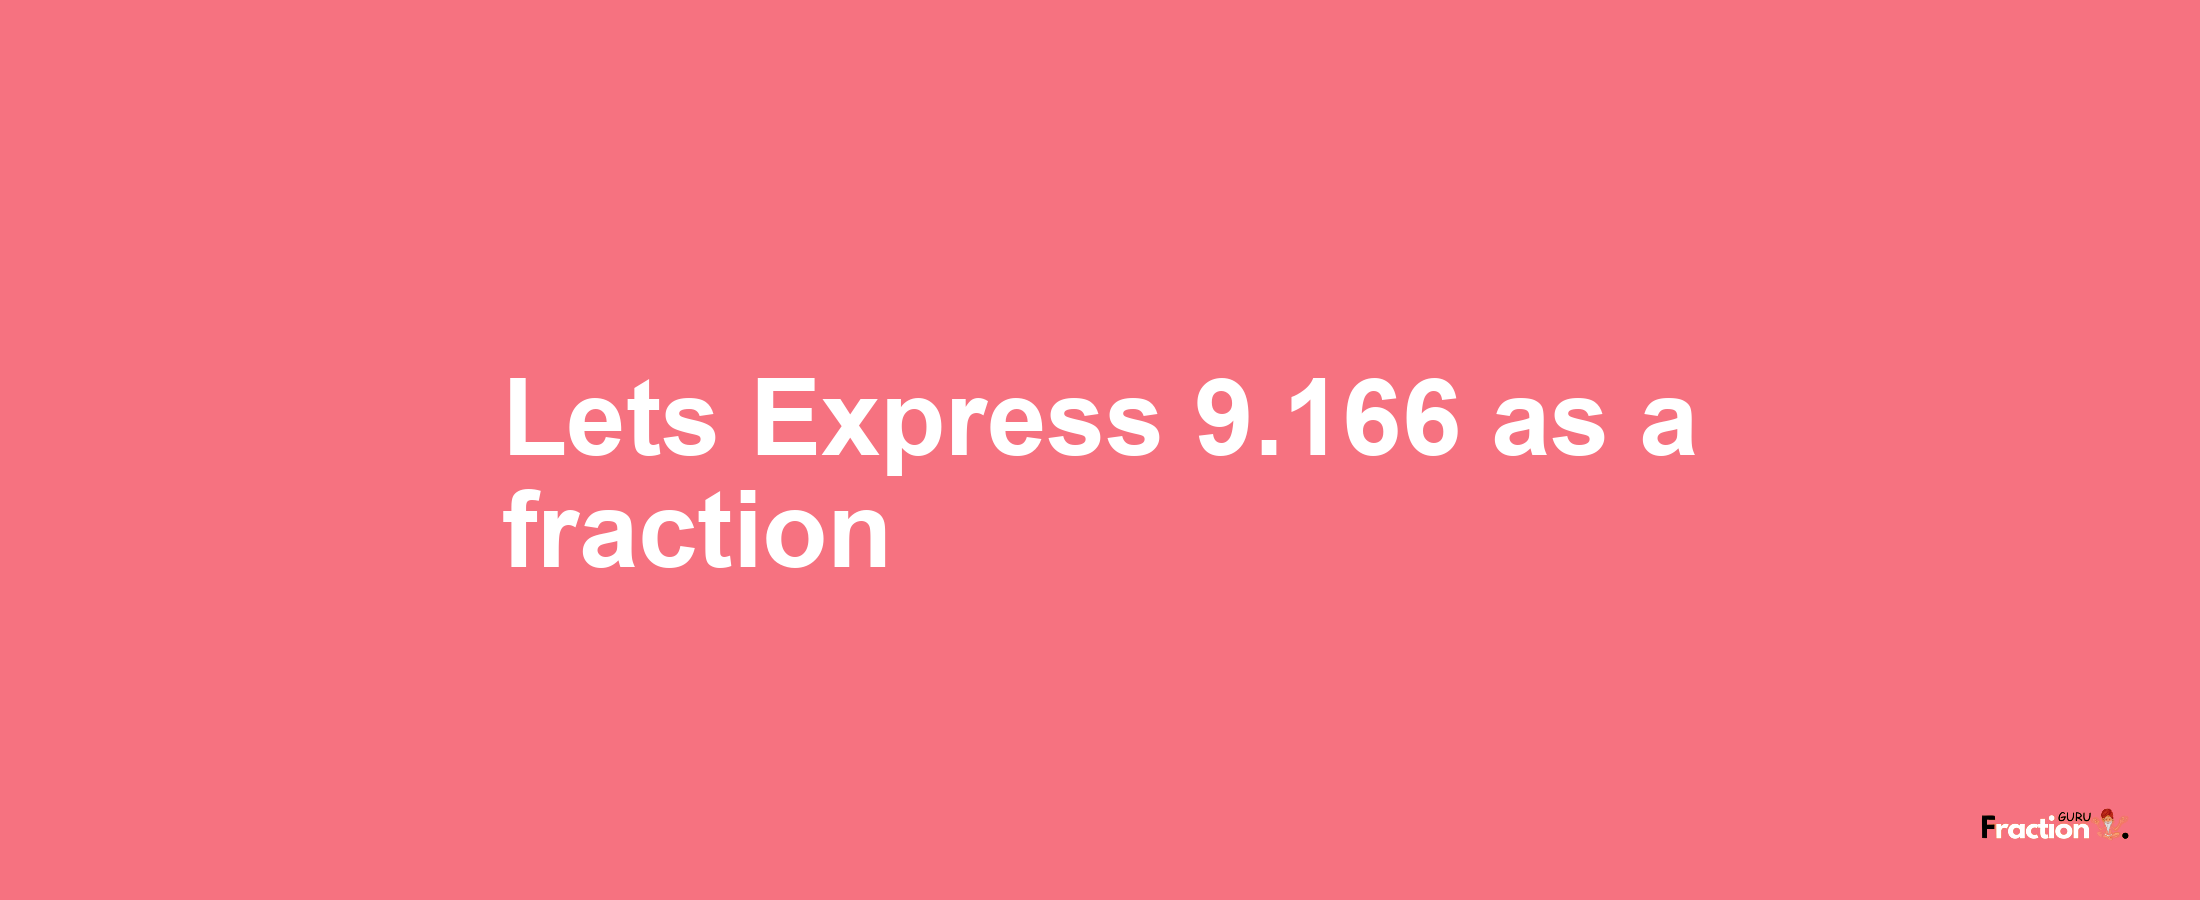 Lets Express 9.166 as afraction